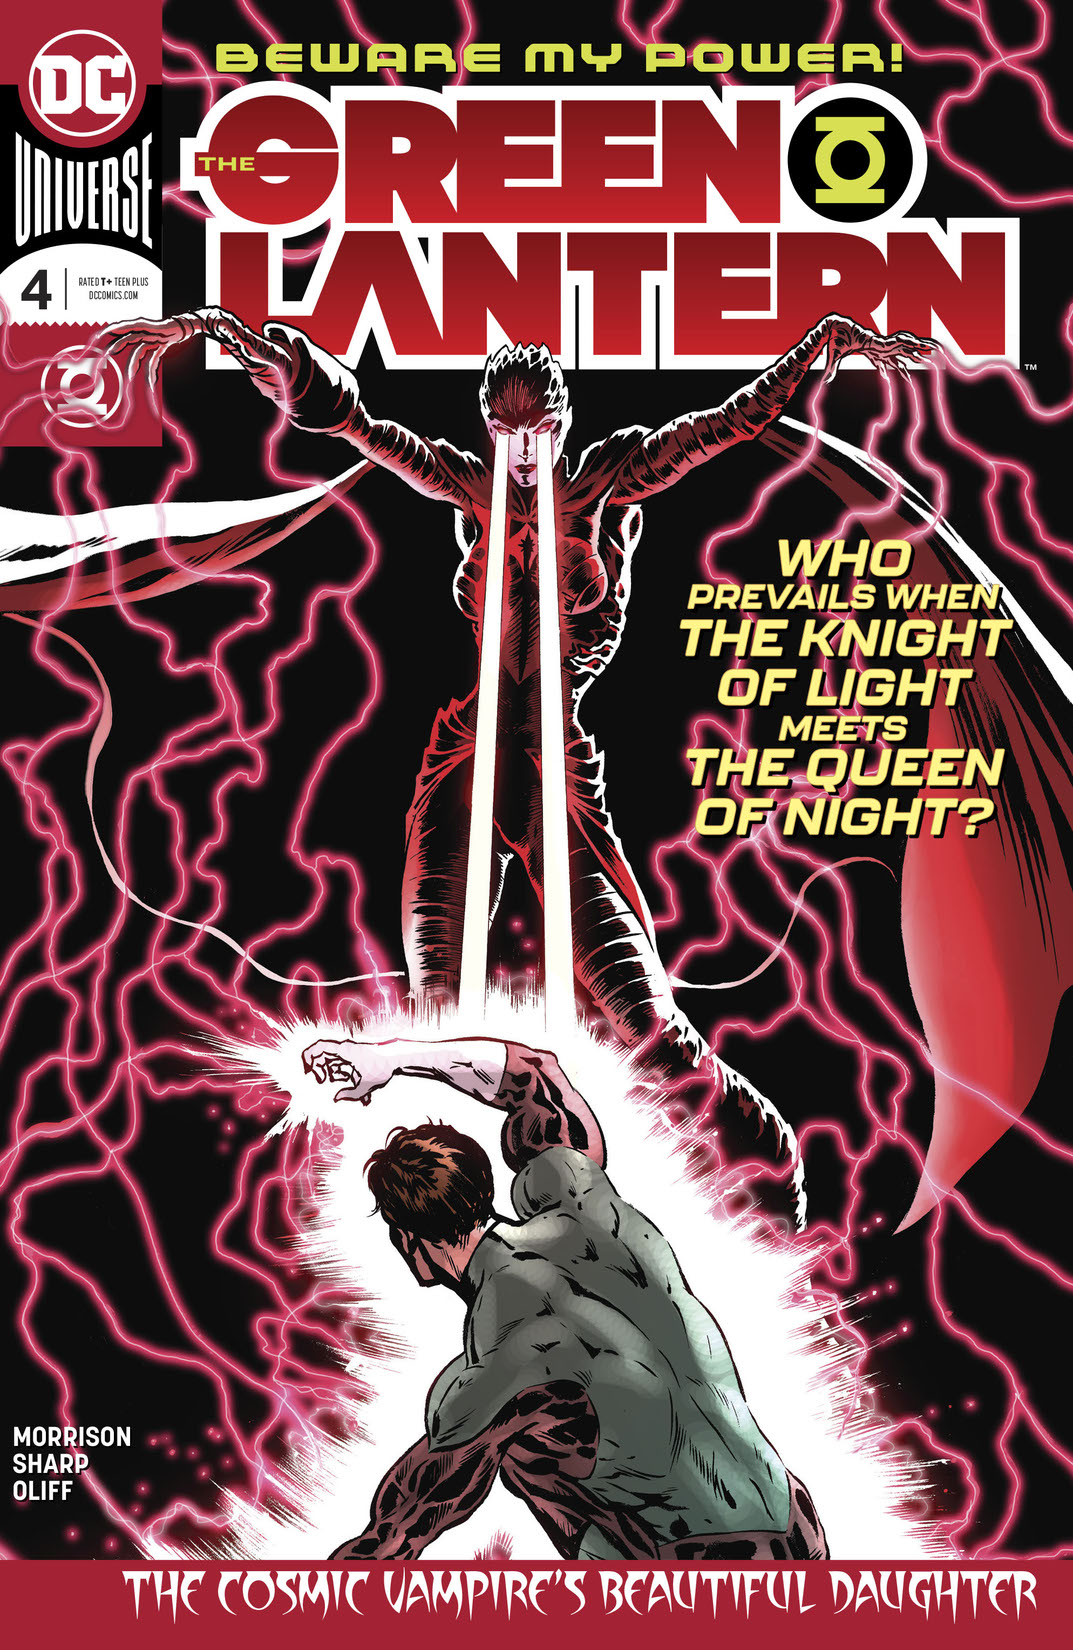 The Green Lantern (2018-) #4 preview images